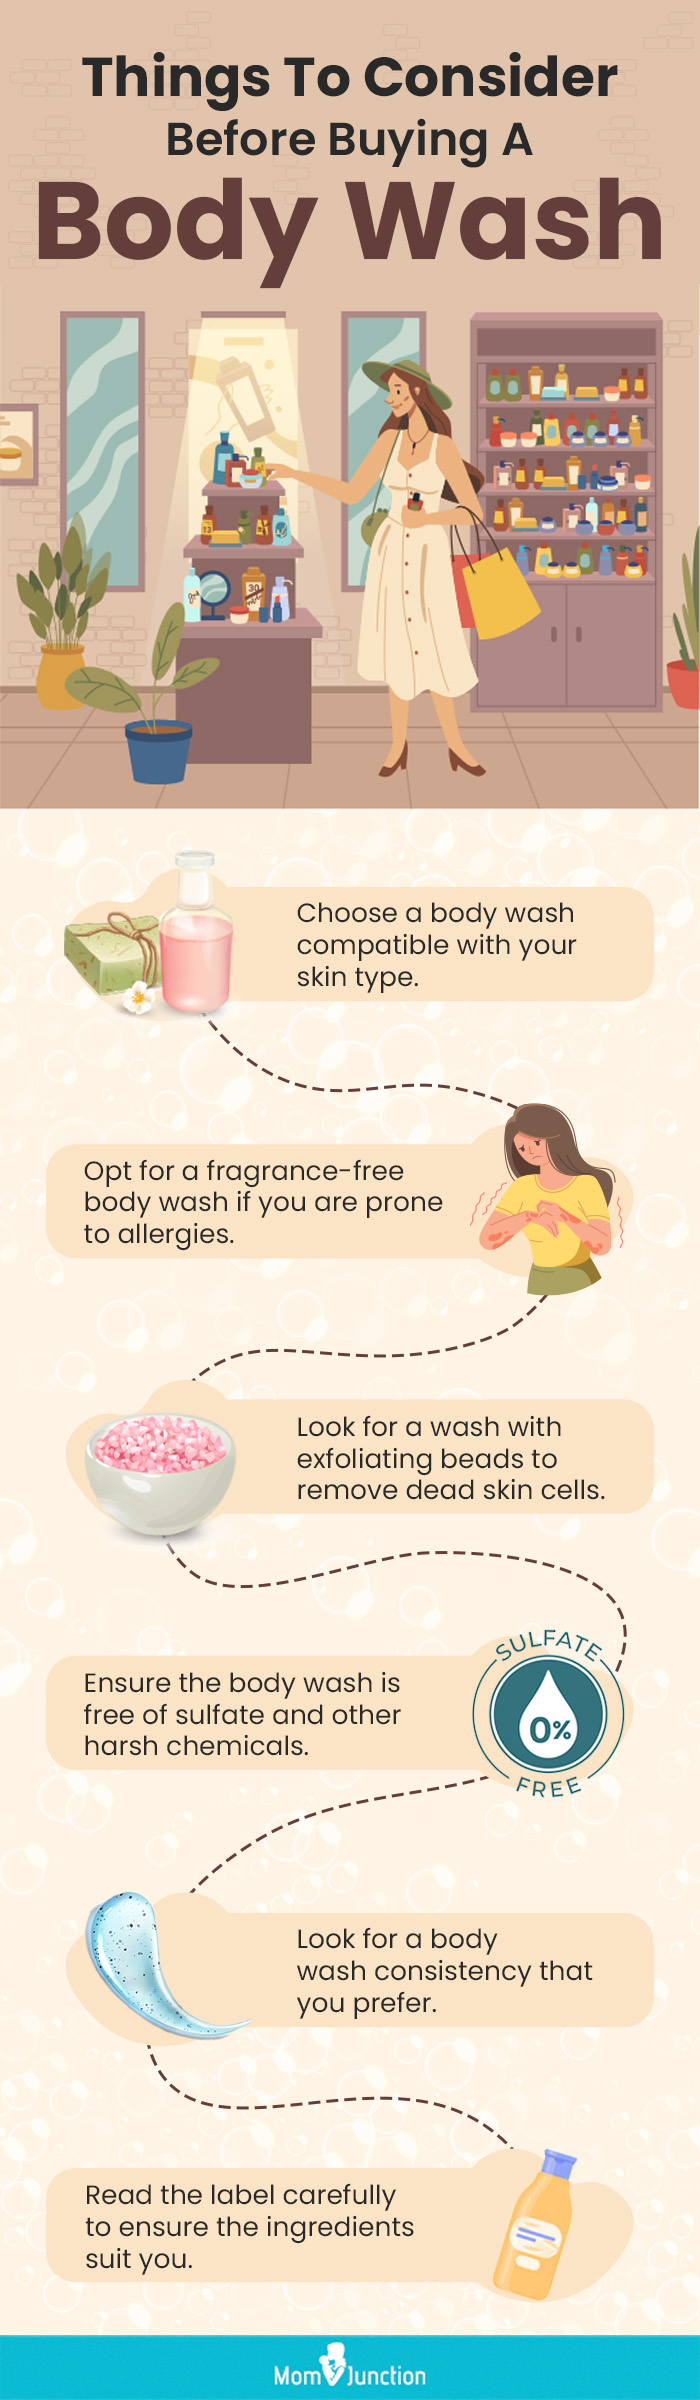 Things To Consider Before Buying A Body Wash